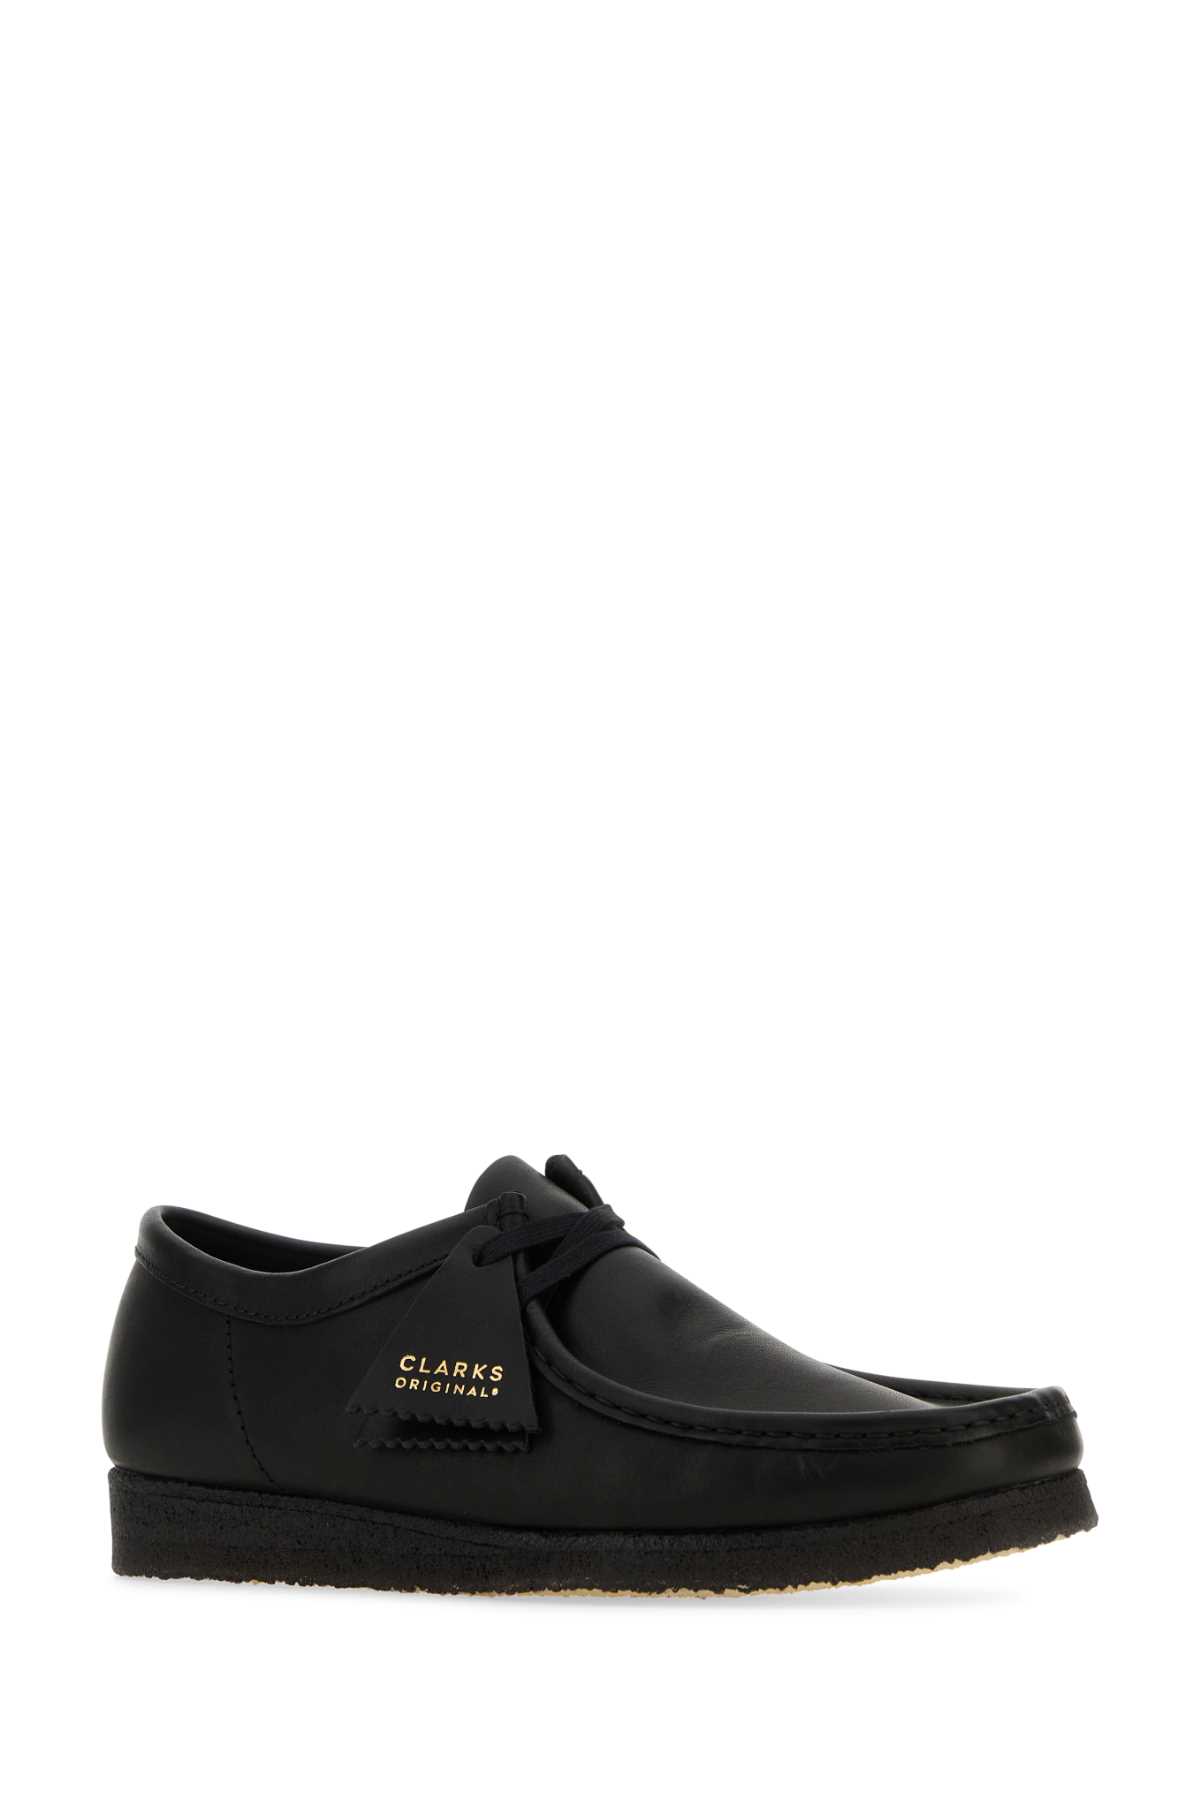 Clarks Black Leather Wallabee Ankle Boots In Blackleather